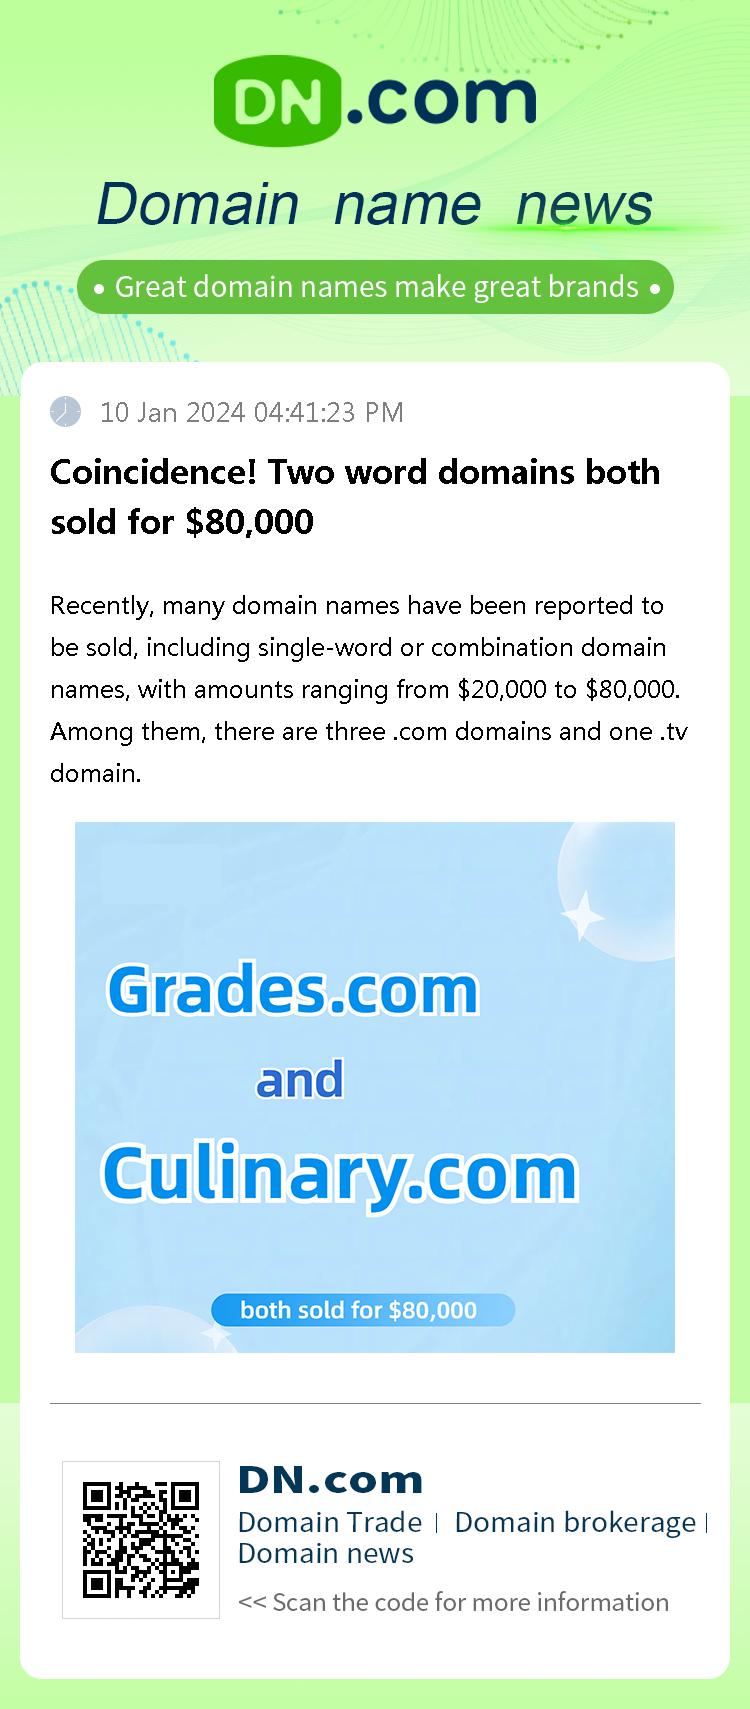 Coincidence! Two word domains both sold for $80,000